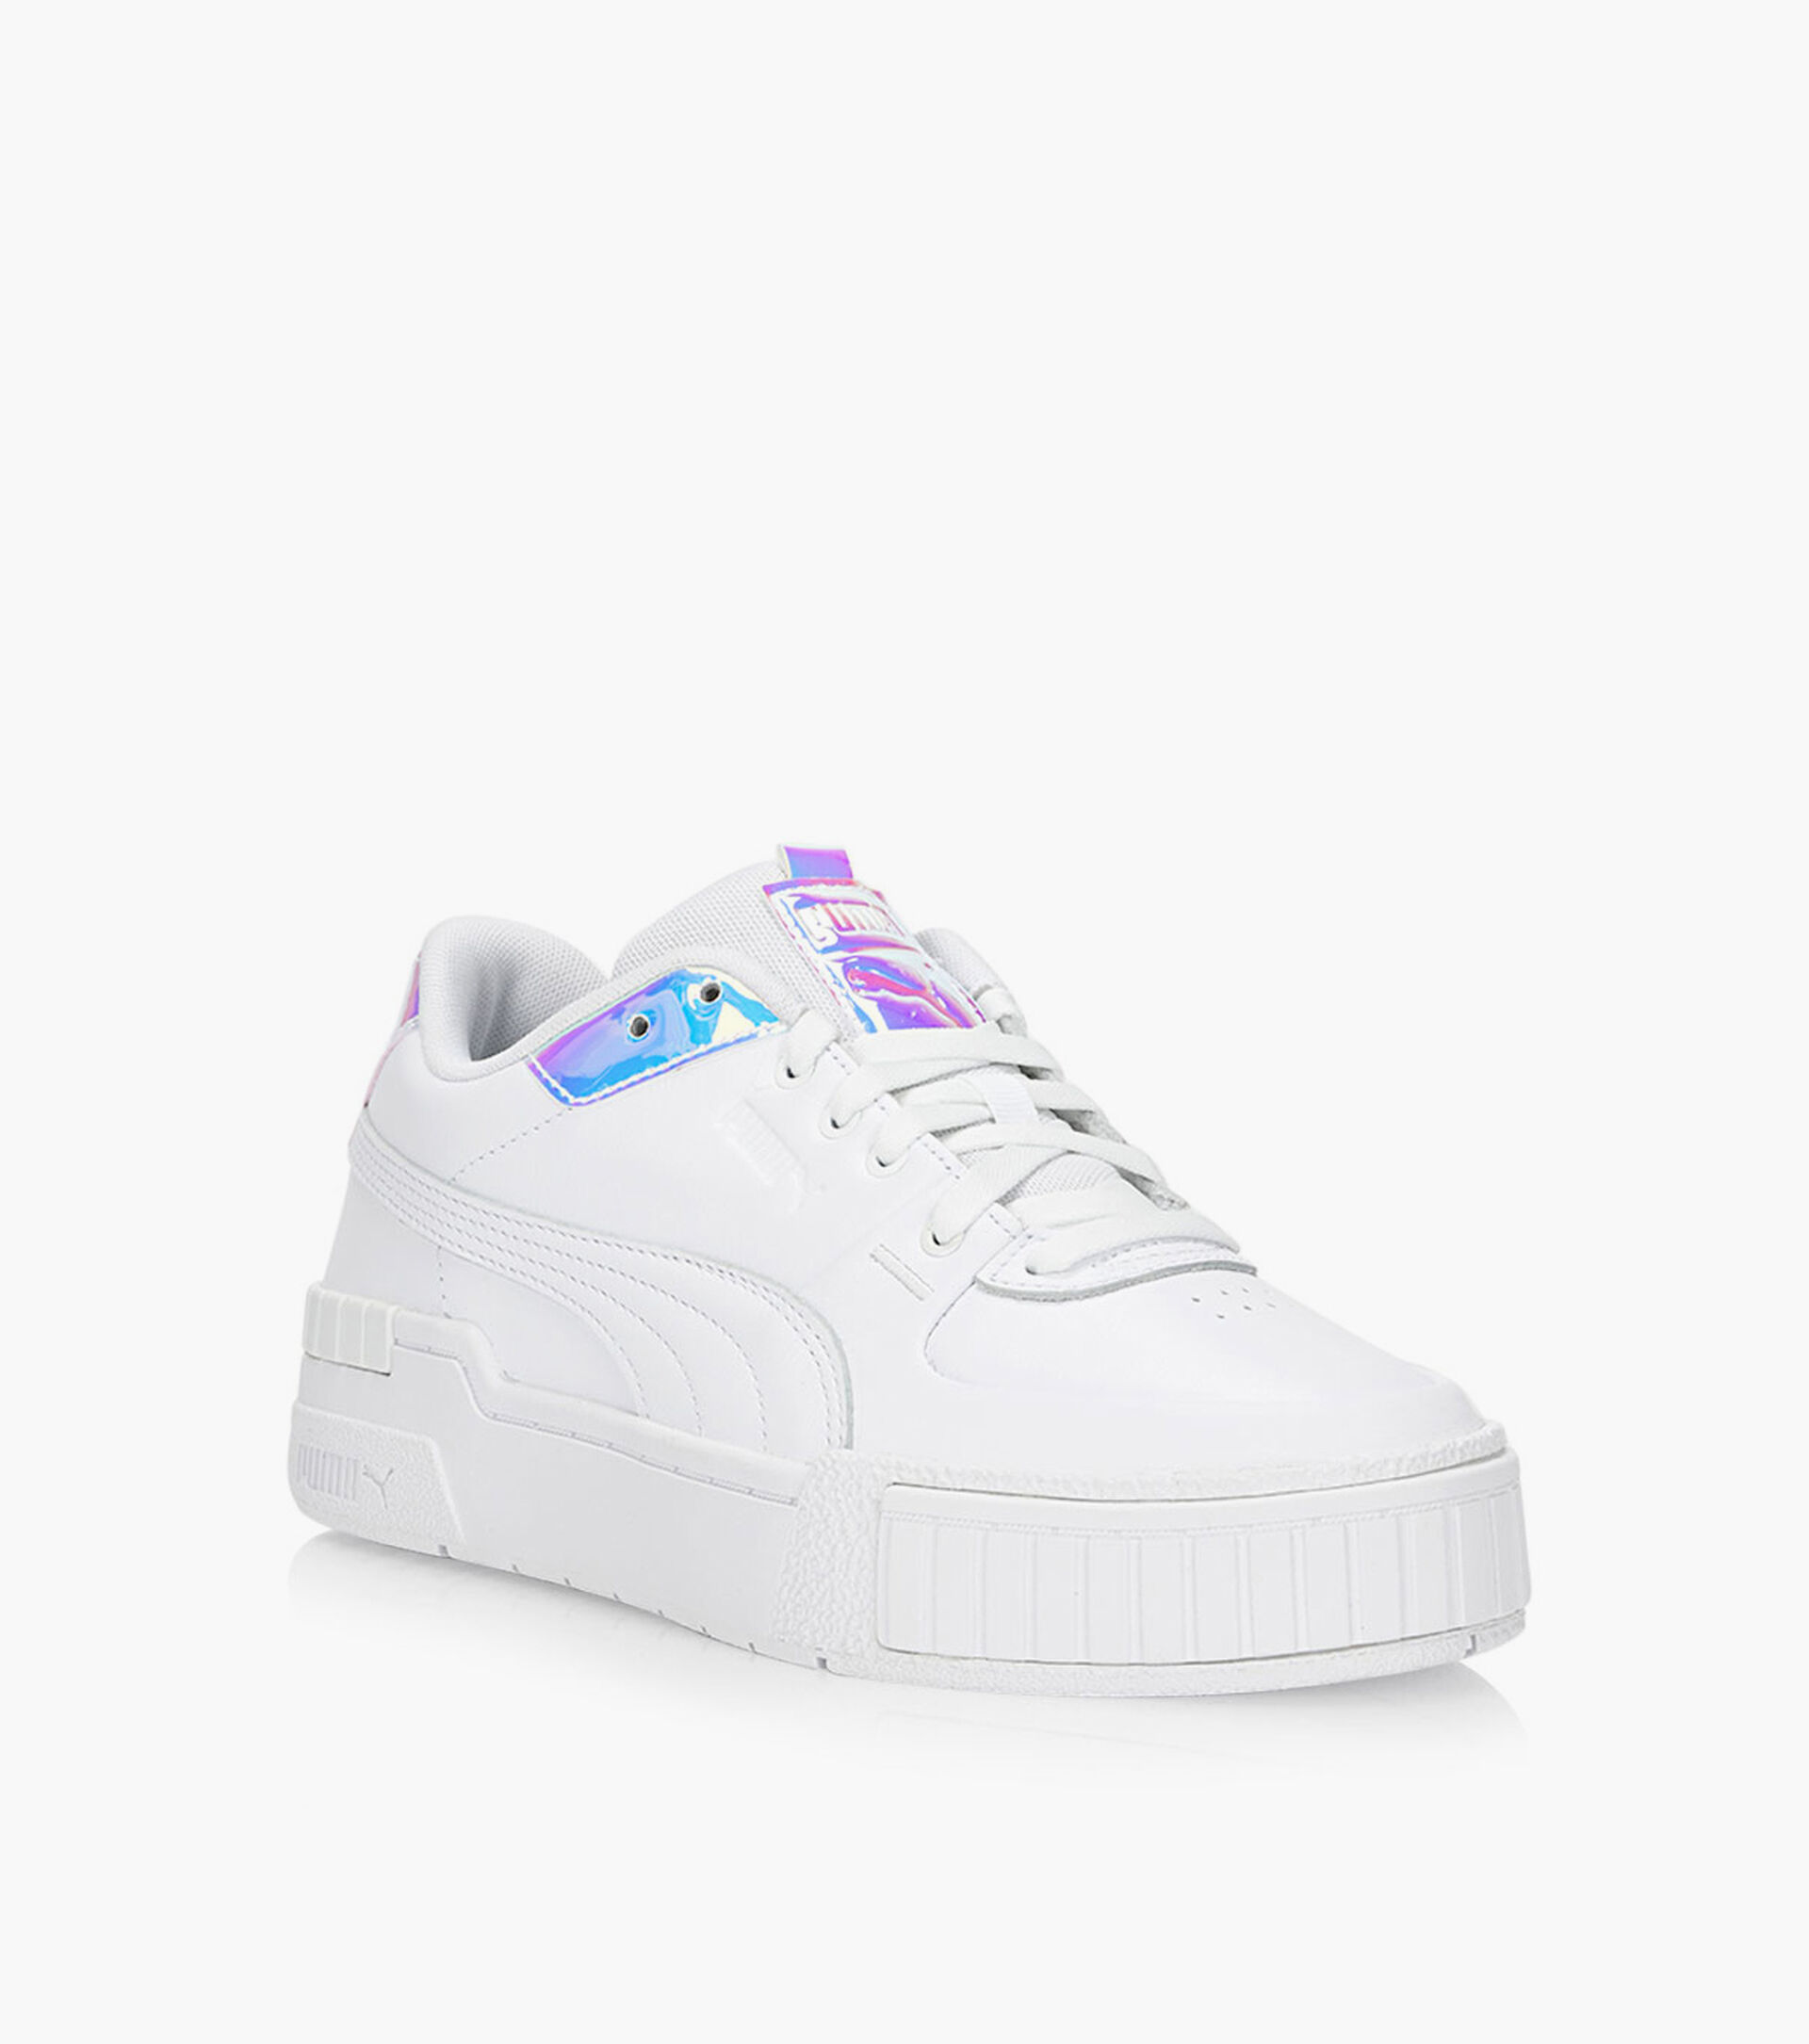 PUMA CALI SPORT GLOW WN'S - White Leather | Browns Shoes